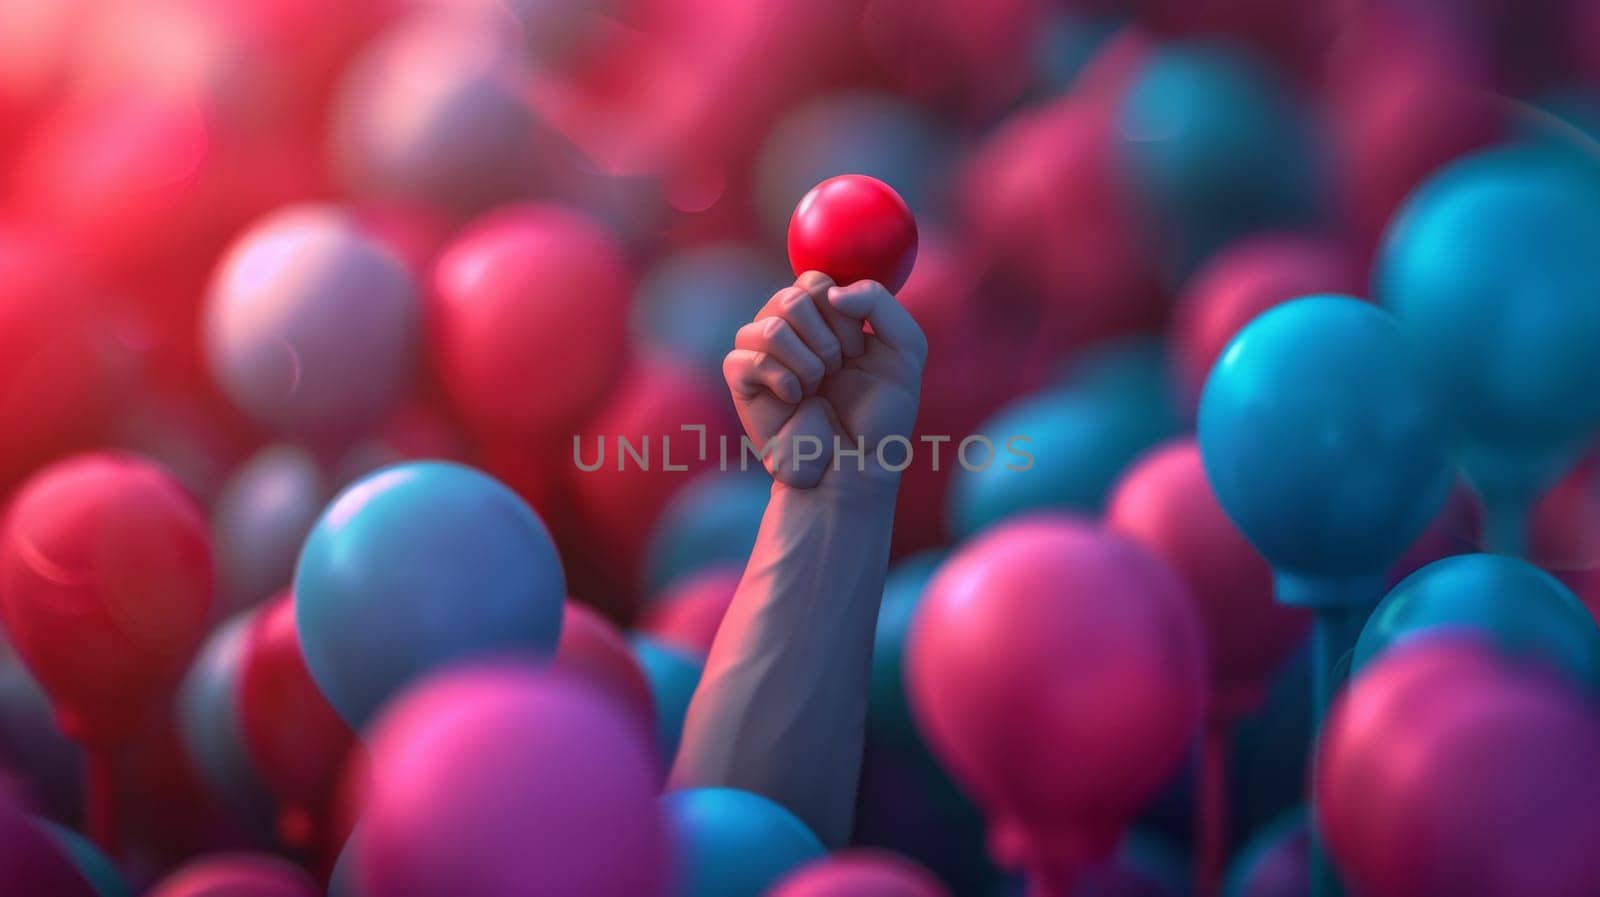 A hand holding a red balloon in the midst of many blue balloons